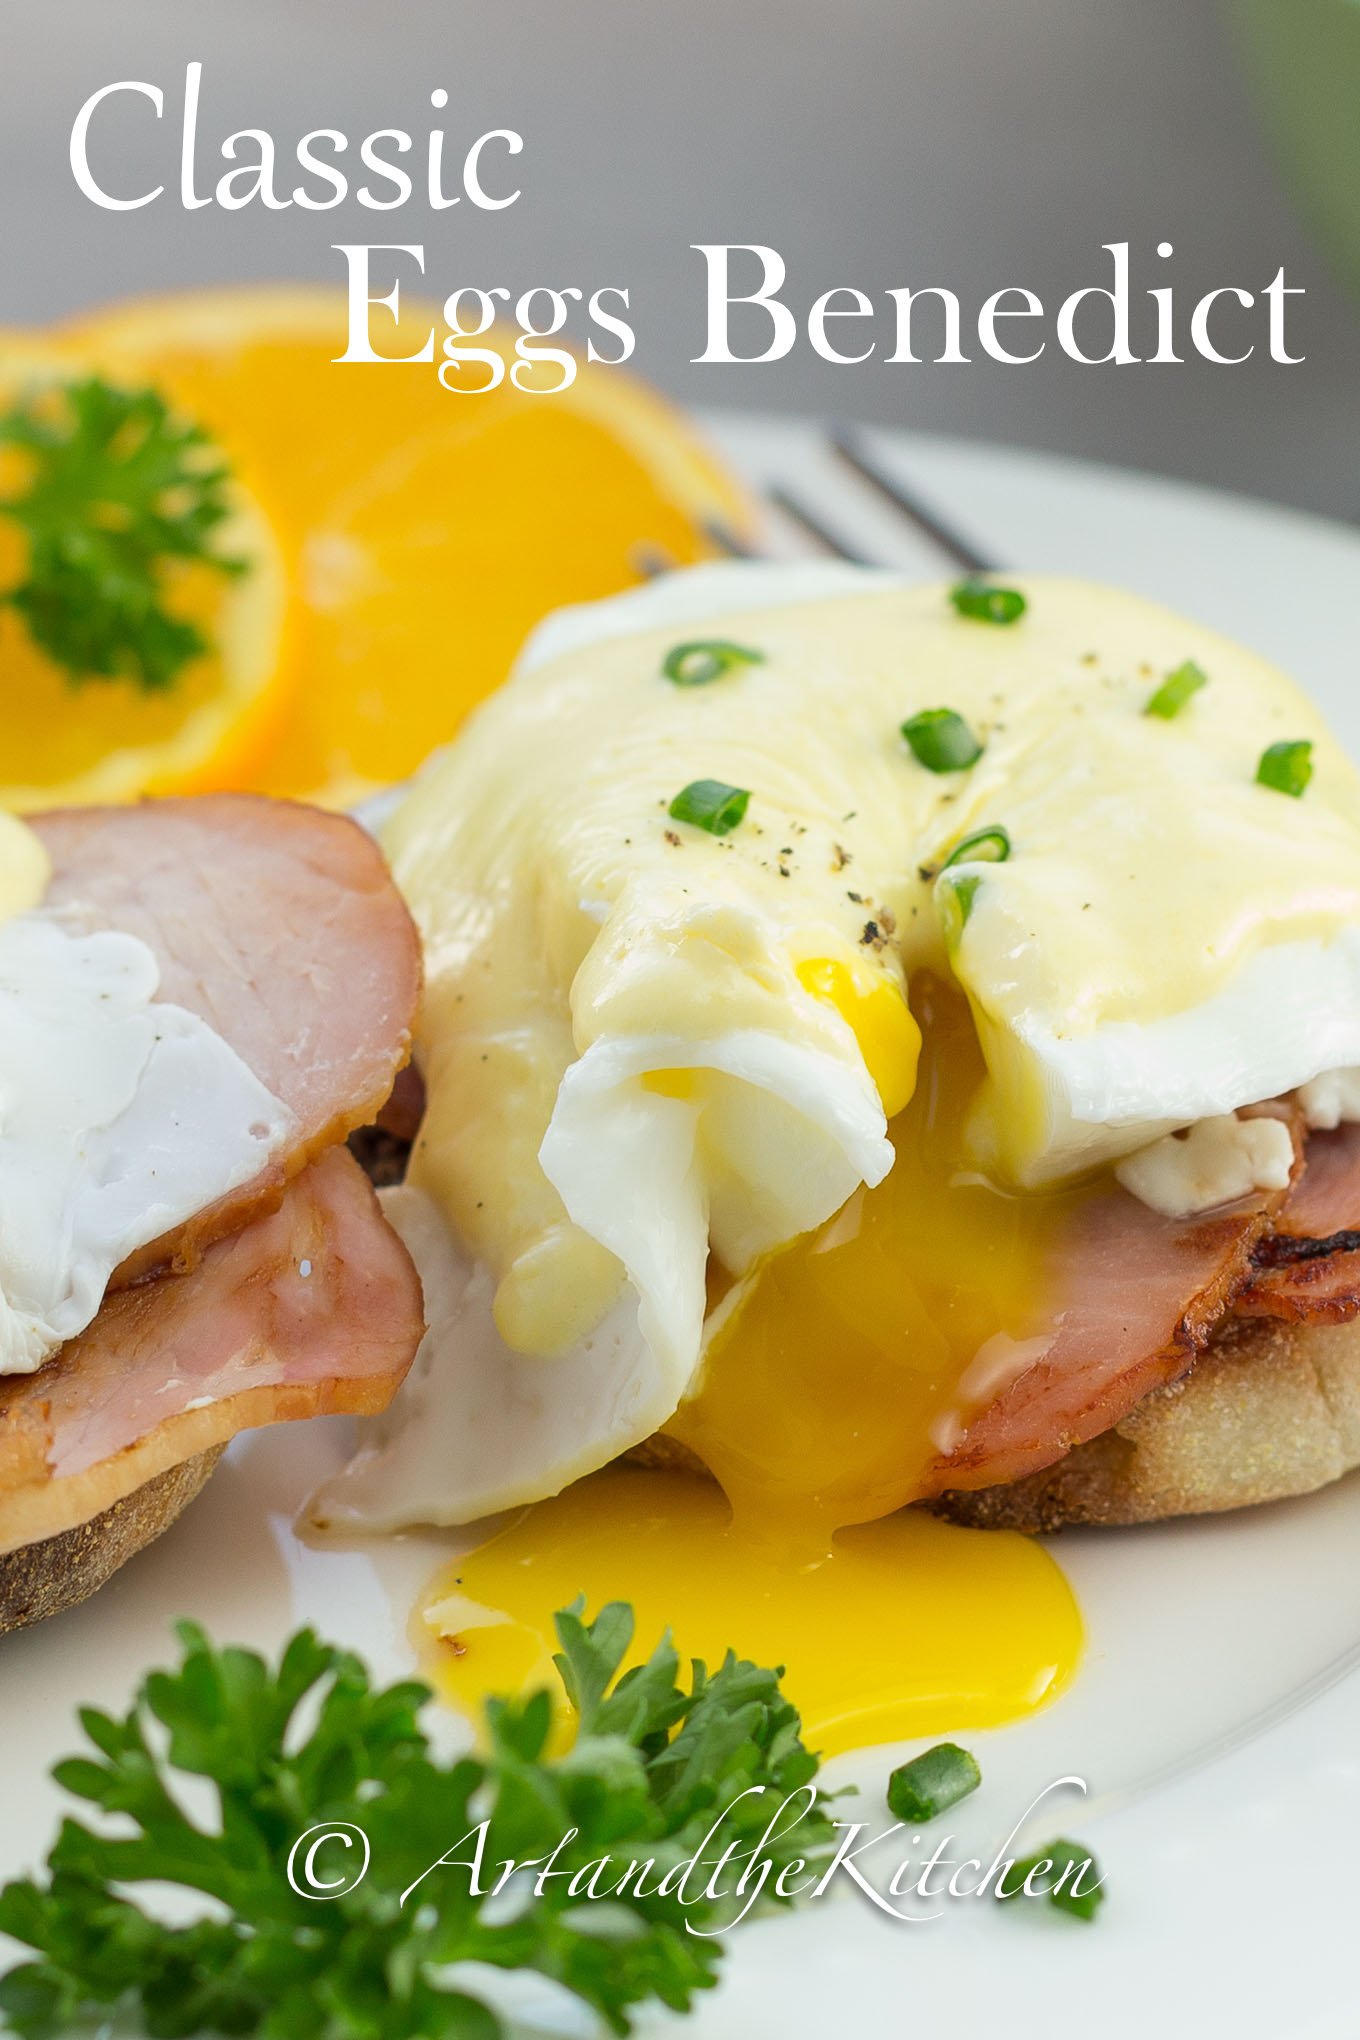 An easy recipe for making perfect Eggs Benedict. Using a blender helps make creamy smooth hollandaise sauce. via @artandthekitch